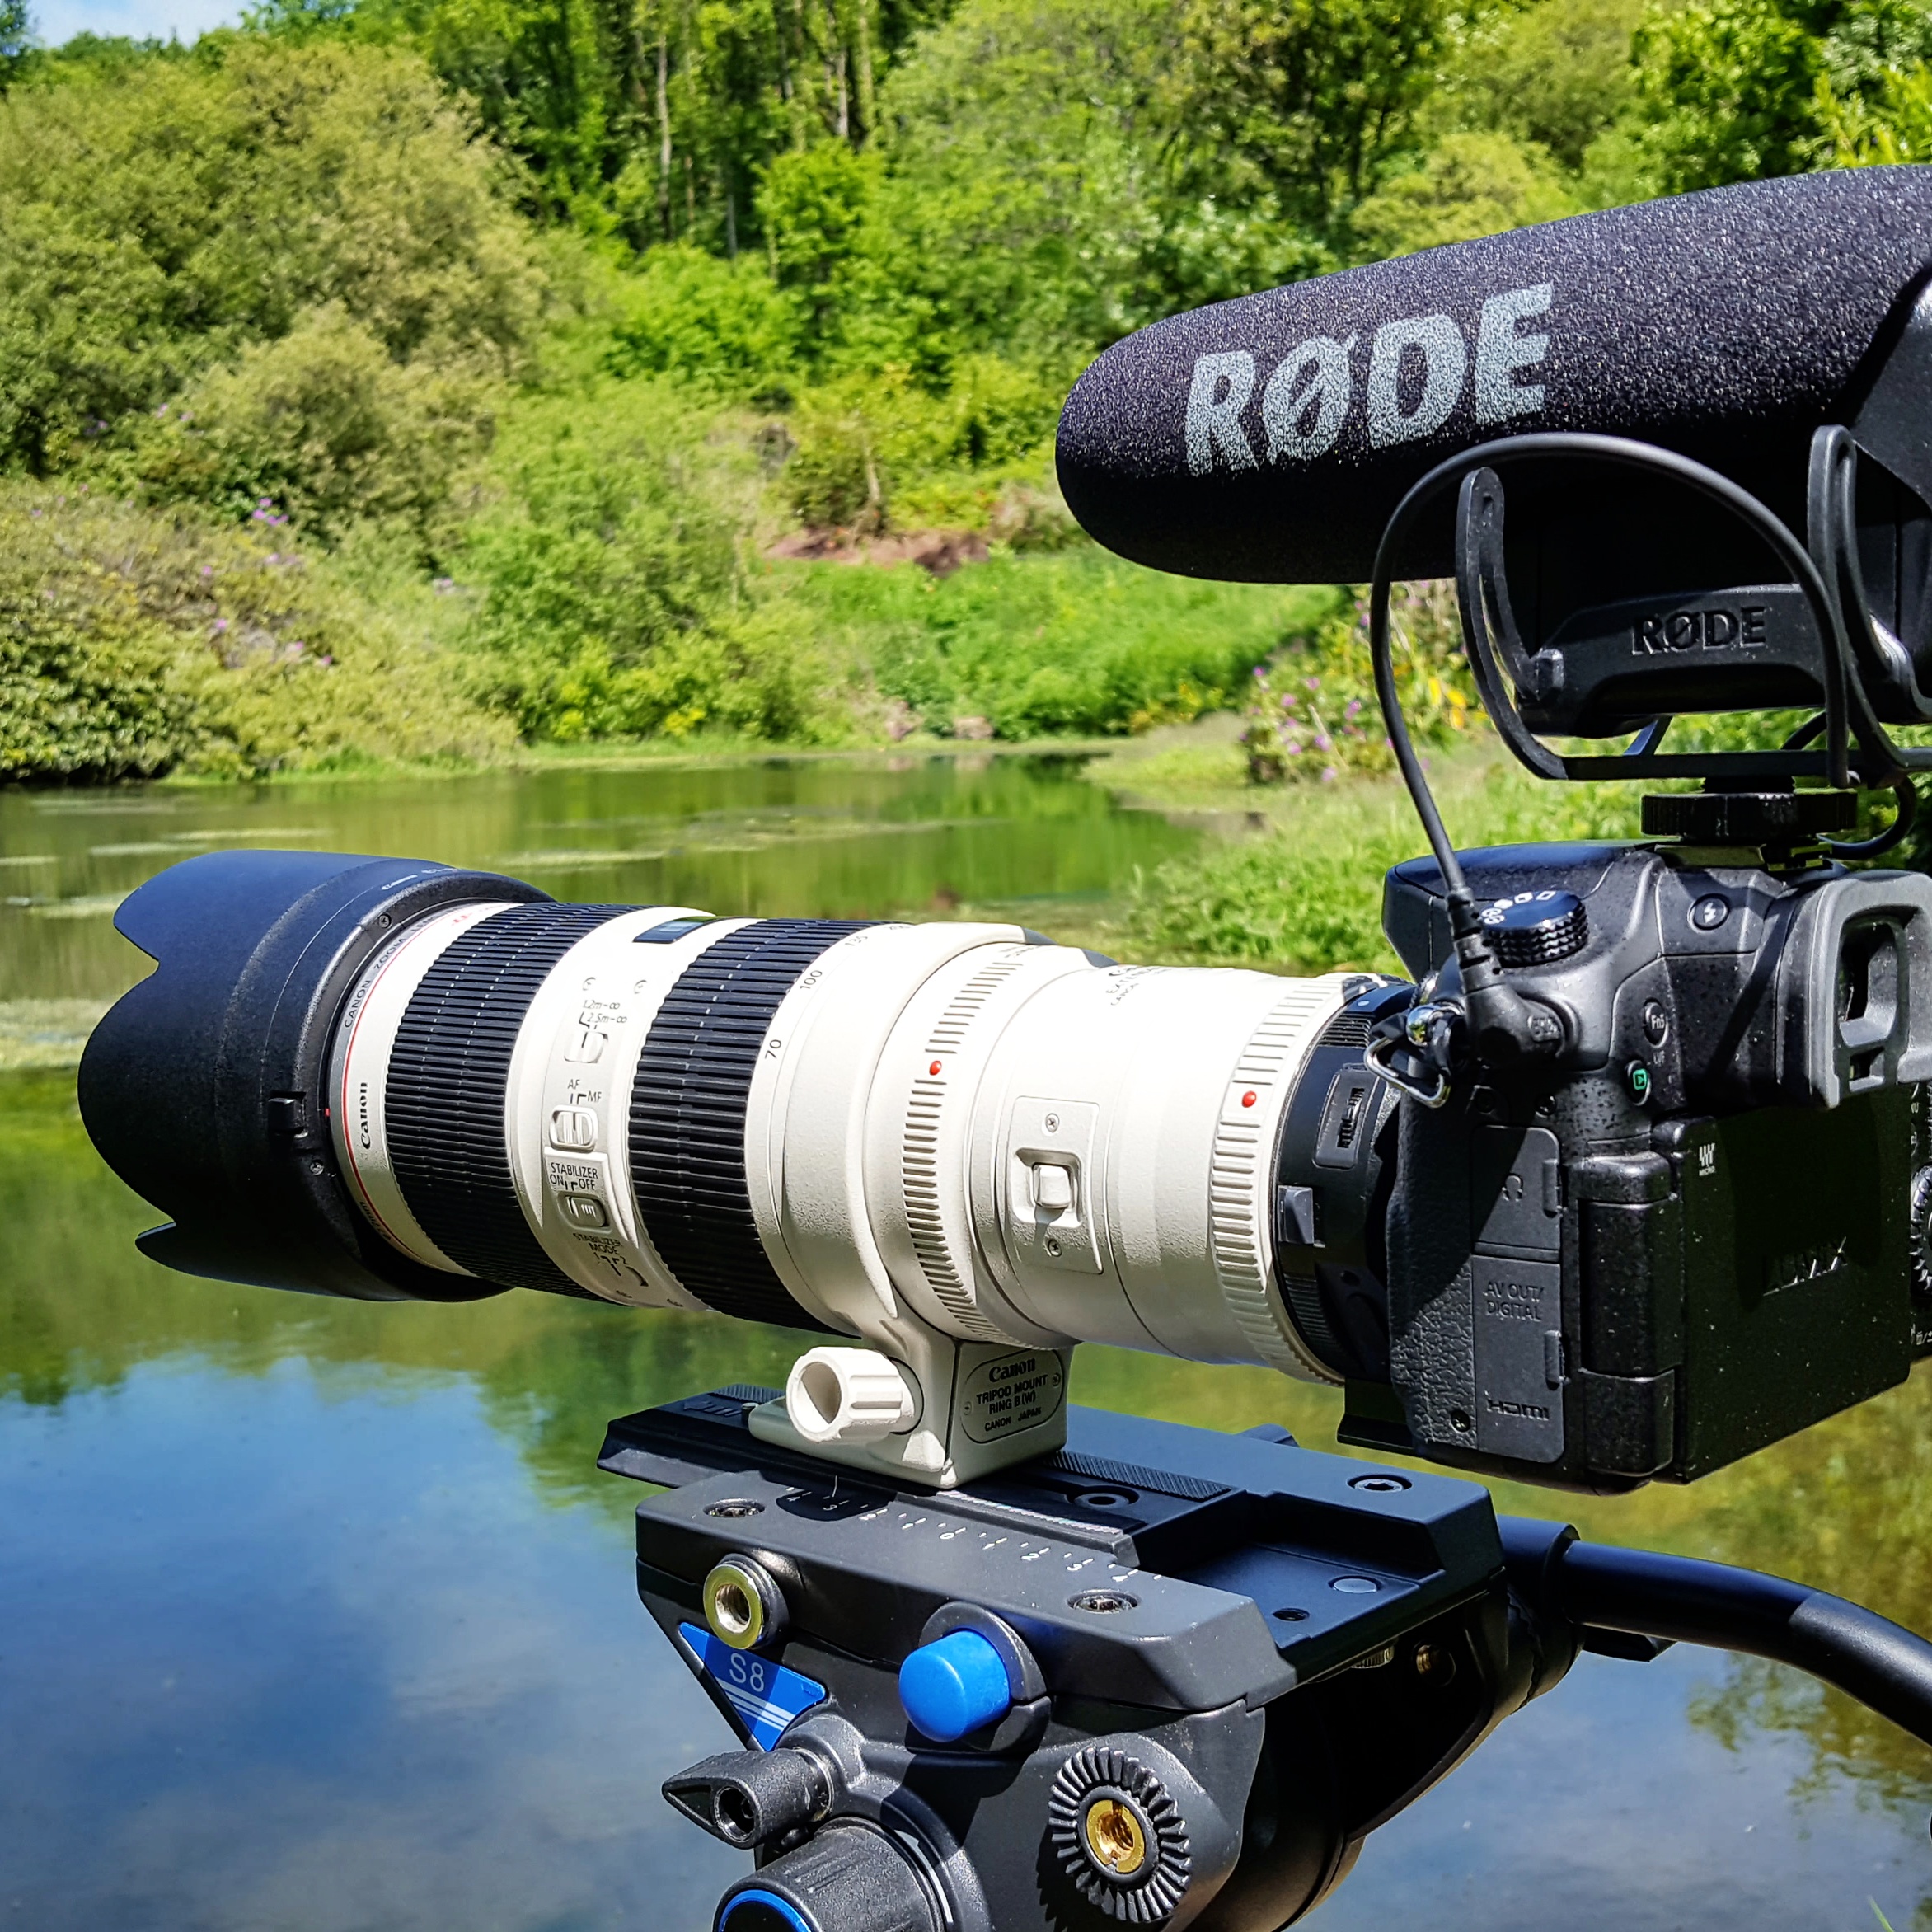 GH4 with canon 70-200mm and 2x converter